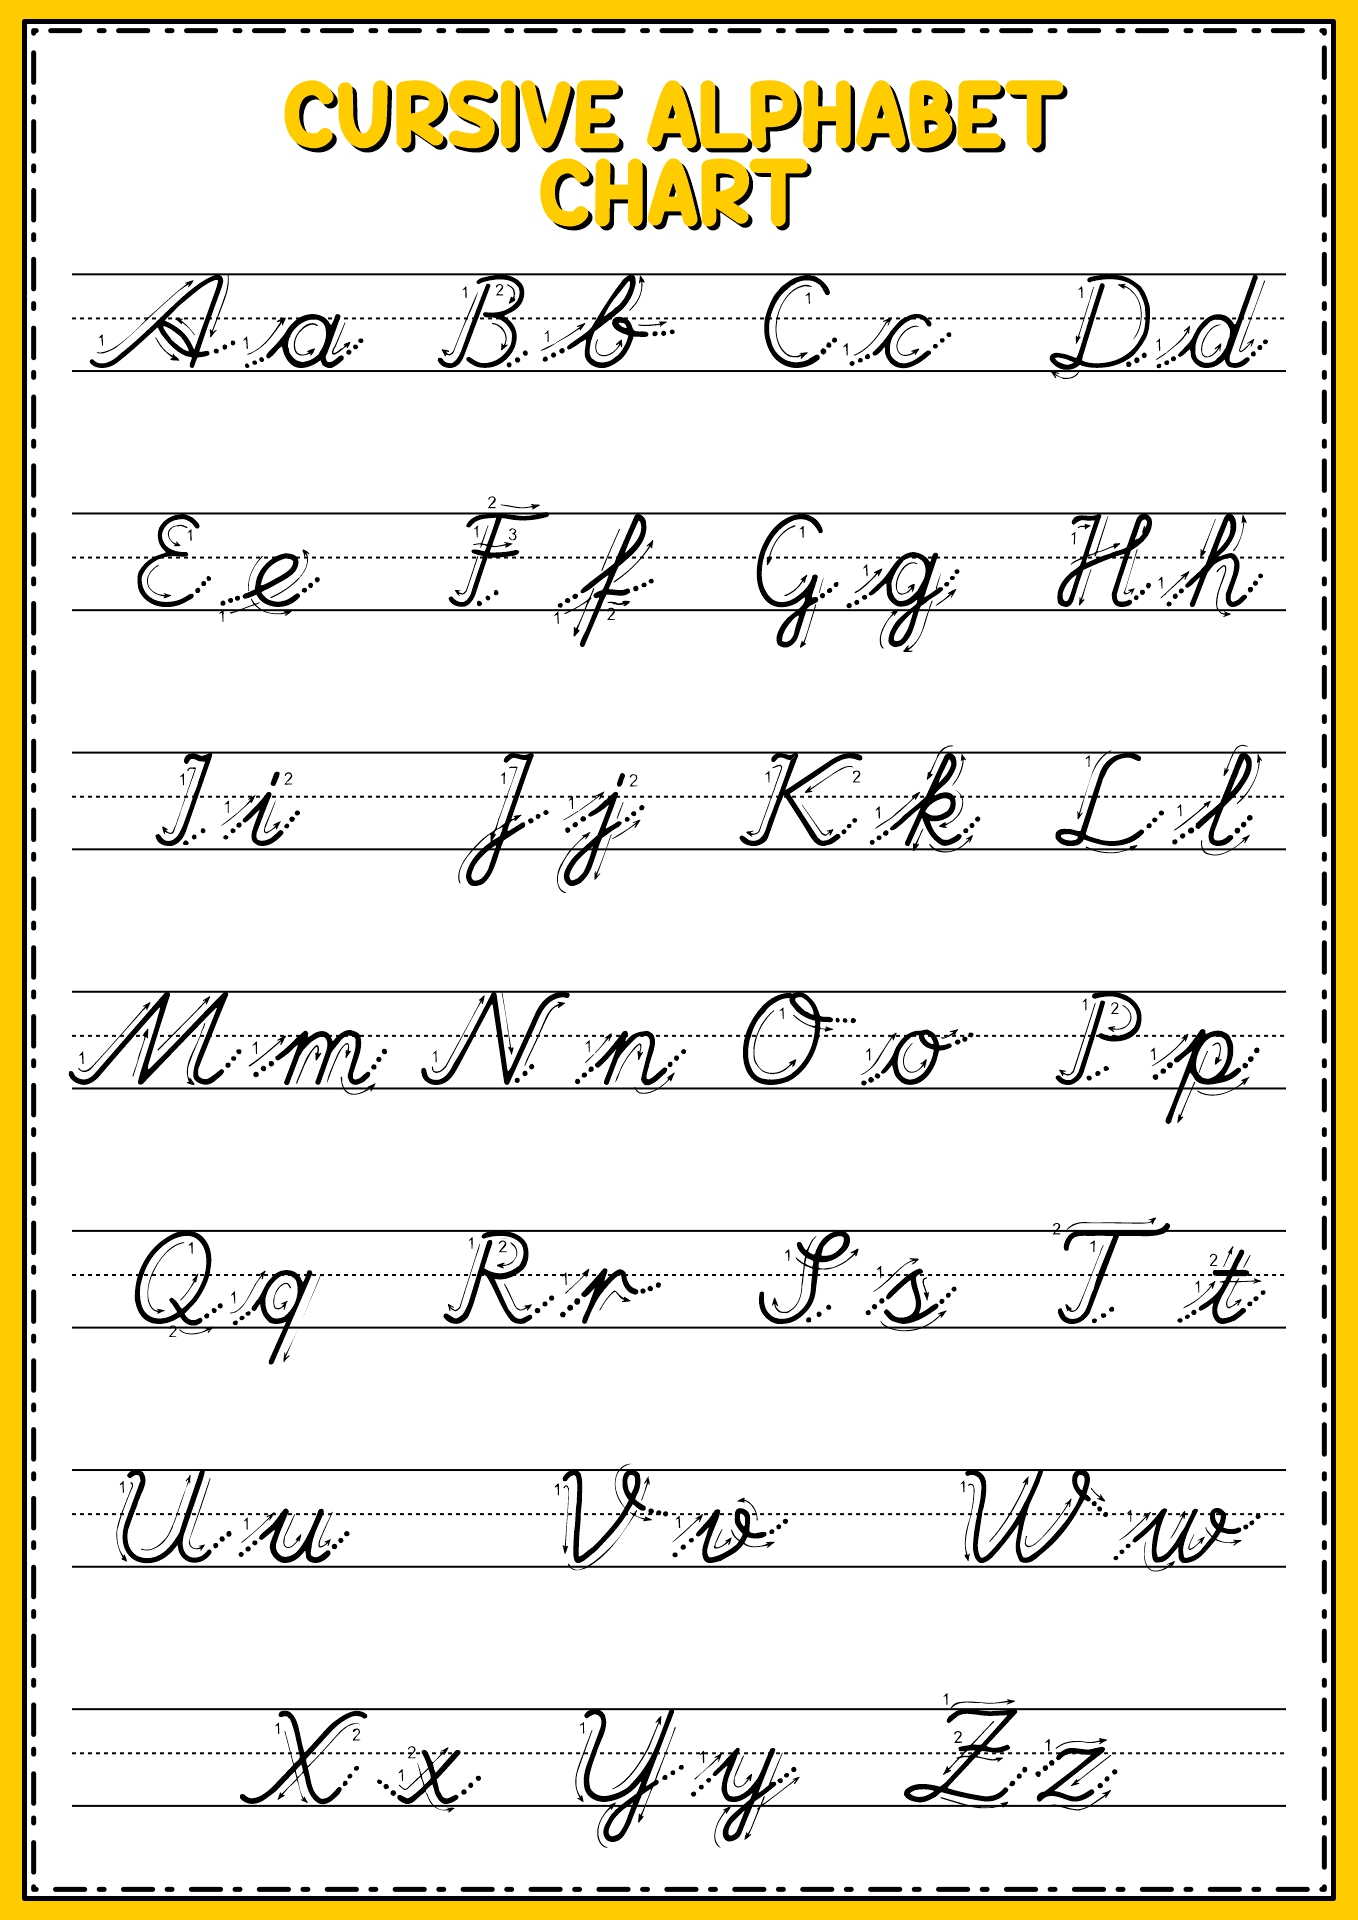 Letters in Cursive Writing Charts